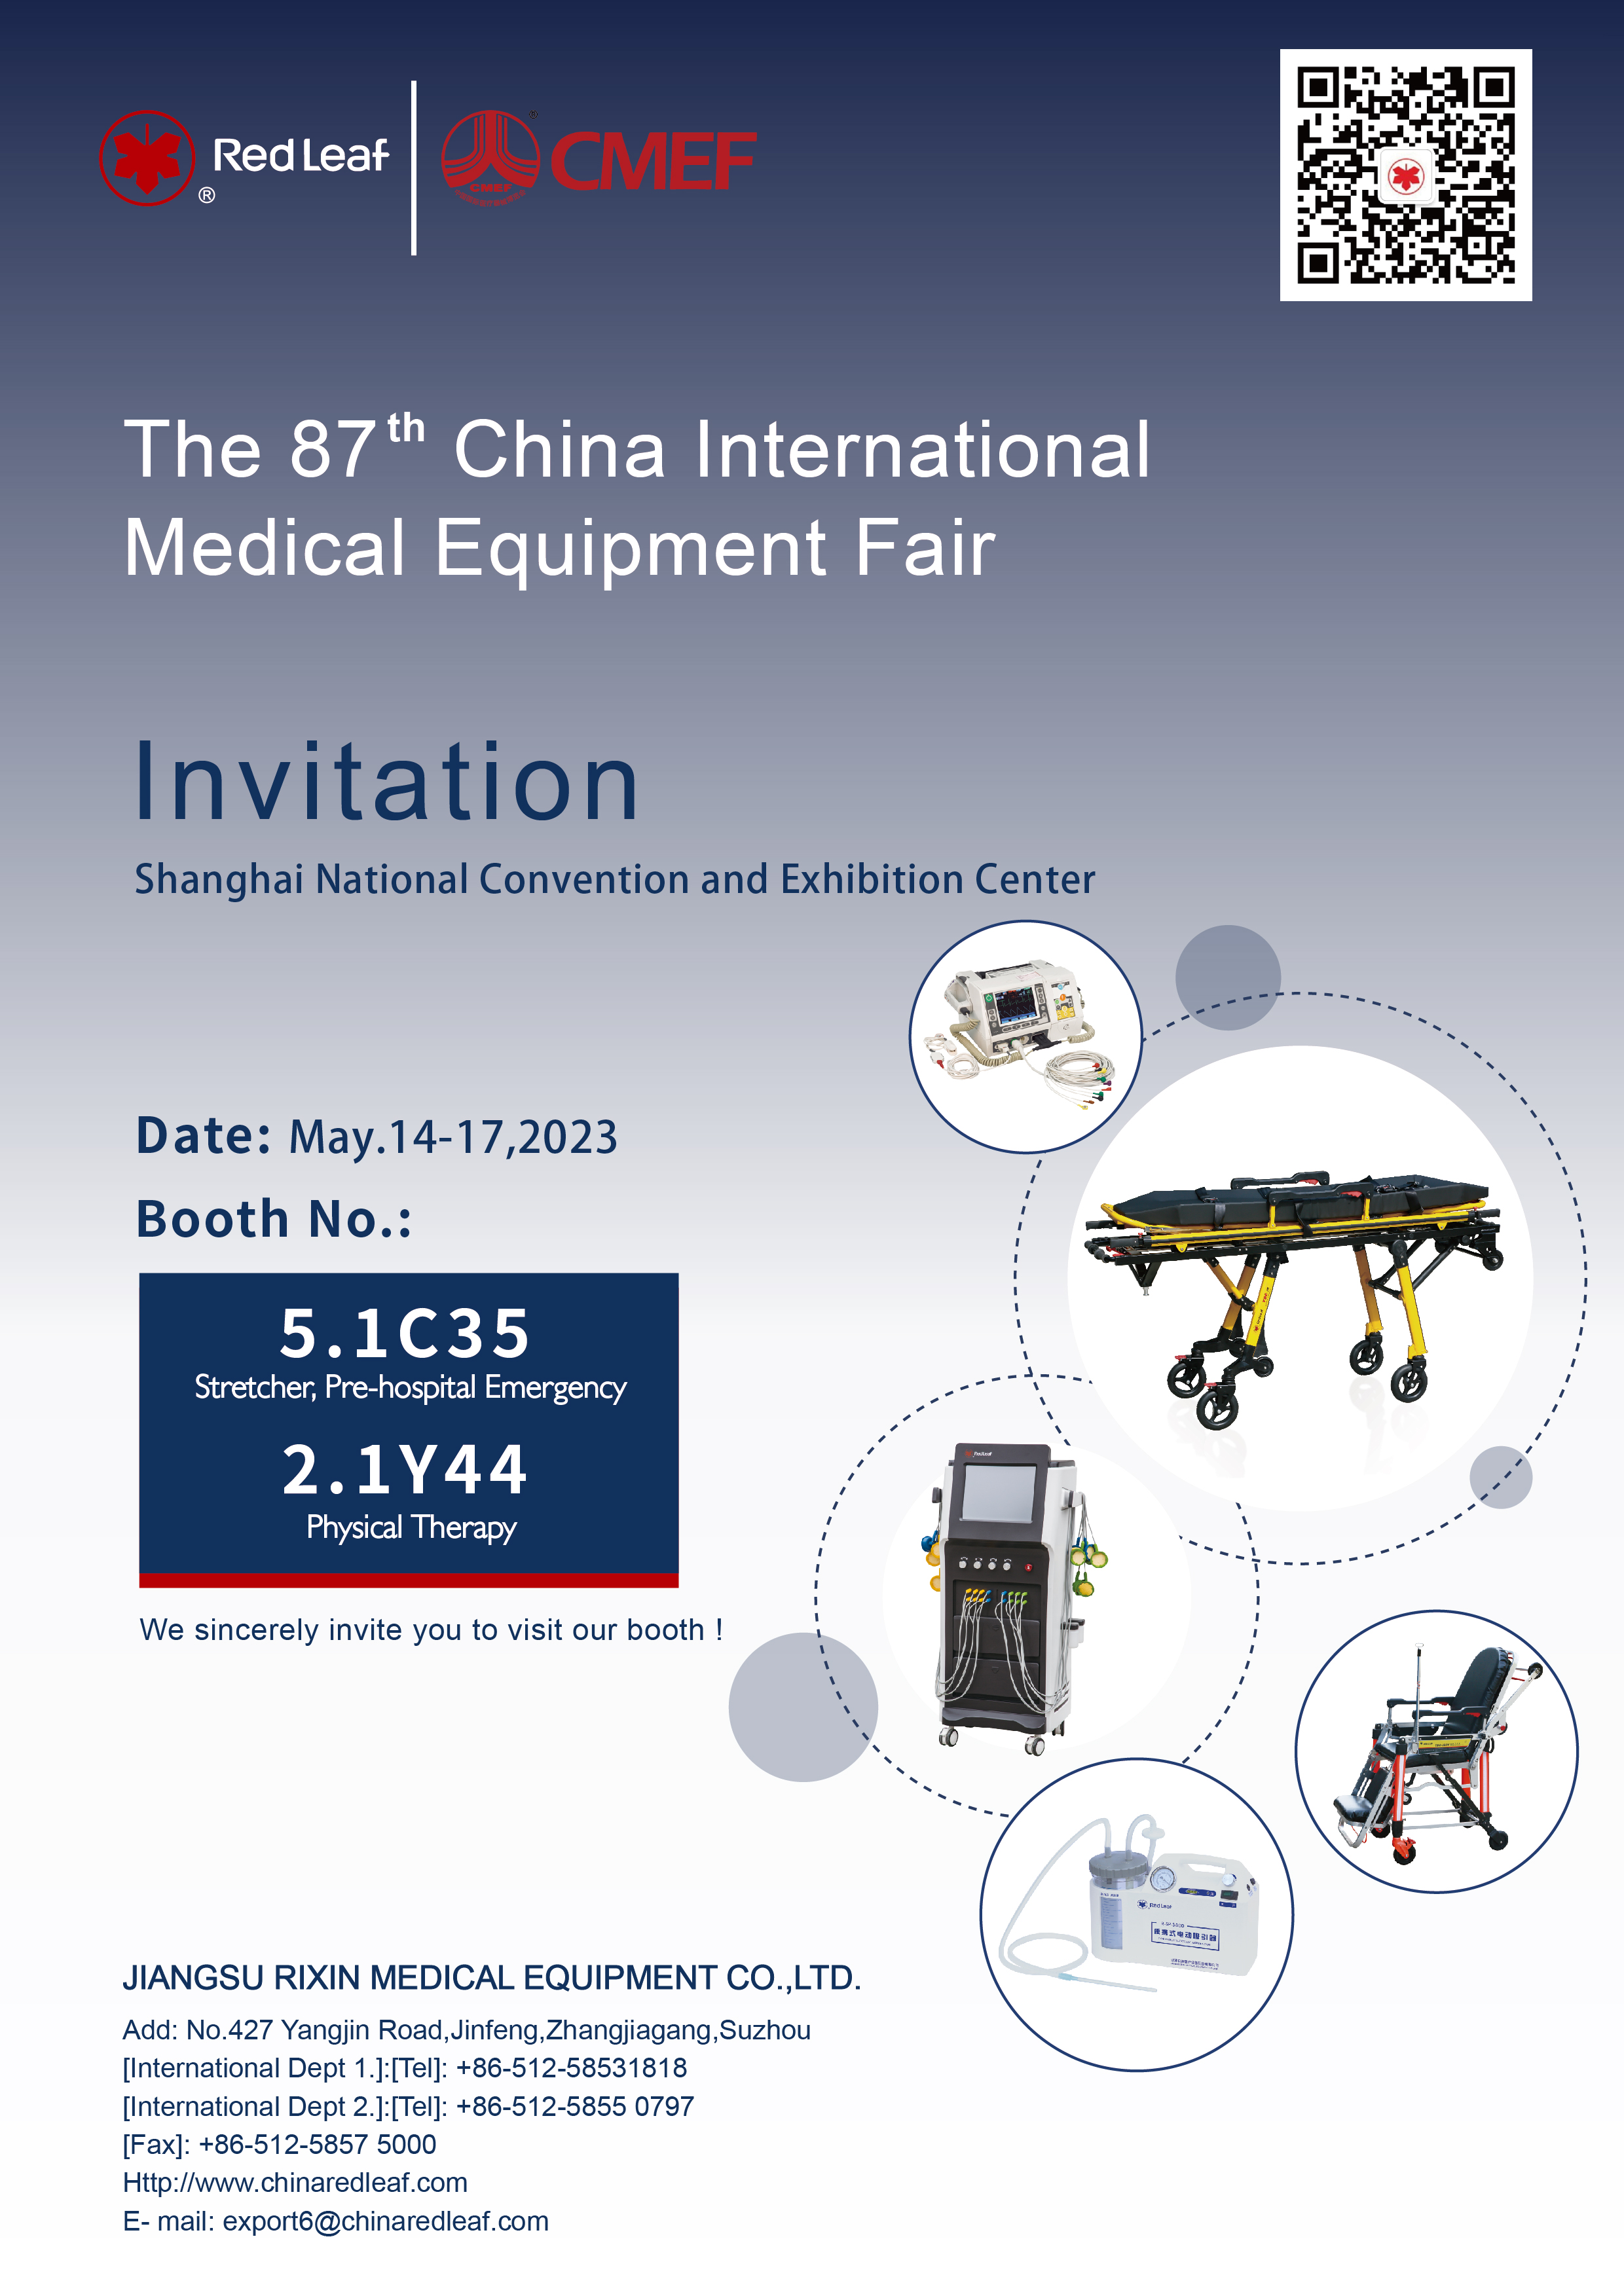 Rixin Medical invite you come to Shanghai CMEF!